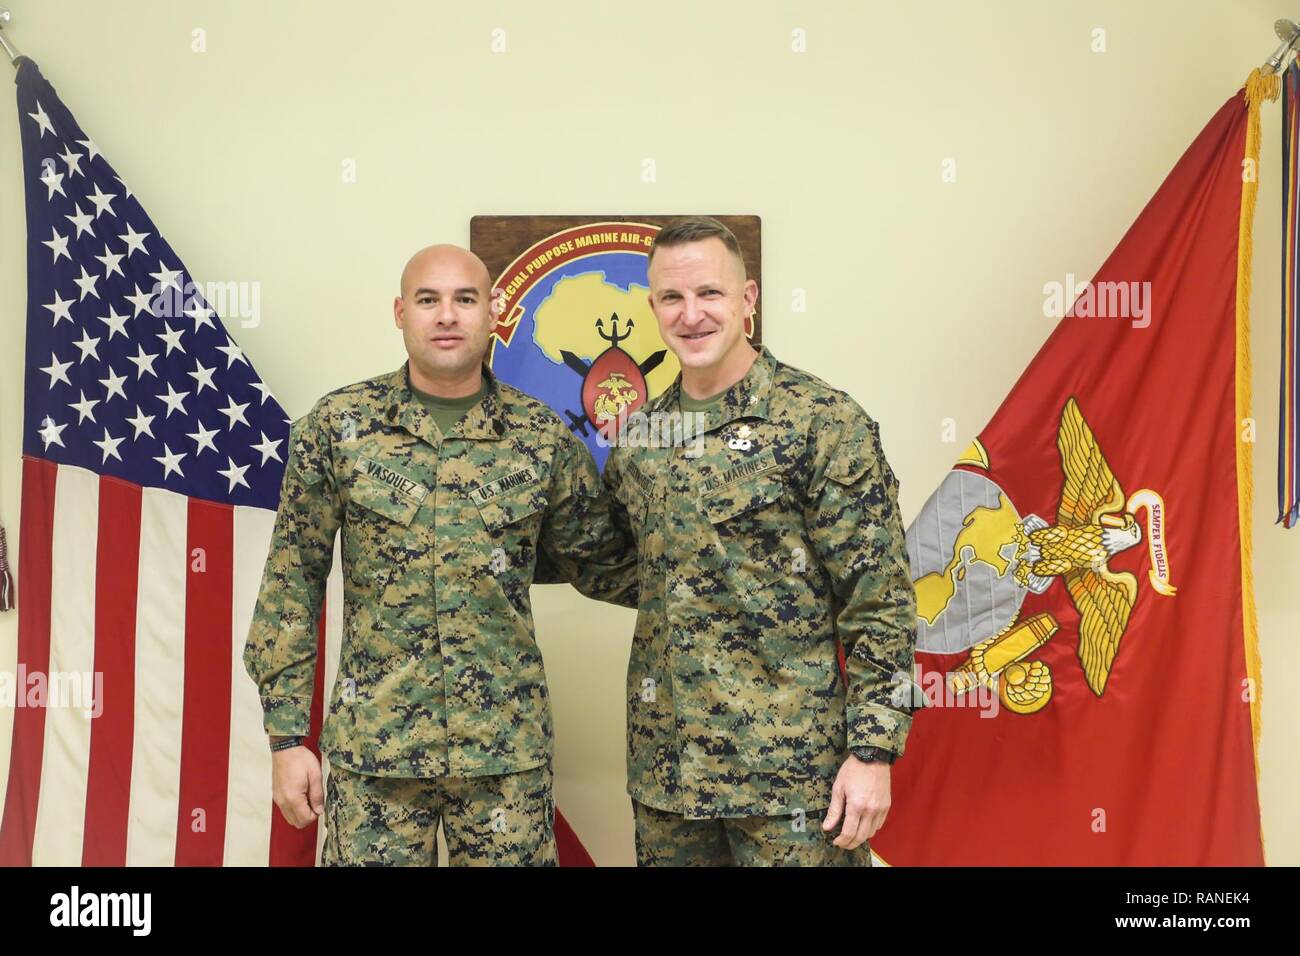 Gunnery Sgt. Juan Vasquez Jr., a U.S. Marine assigned to Special Purpose Marine Air-Ground Task Force – Crisis Response – Africa, poses for a photo with Col. Daniel Greenwood, the commanding officer of SPMAGTF-CR-AF, at Naval Air Station Sigonella, Italy, Feb. 25, 2017. Greenwood formerly served as the commanding officer for Marine Corps Recruiting Station Fort Lauderdale, Florida, while Vasquez was a poolee for the station in 2003. Stock Photo